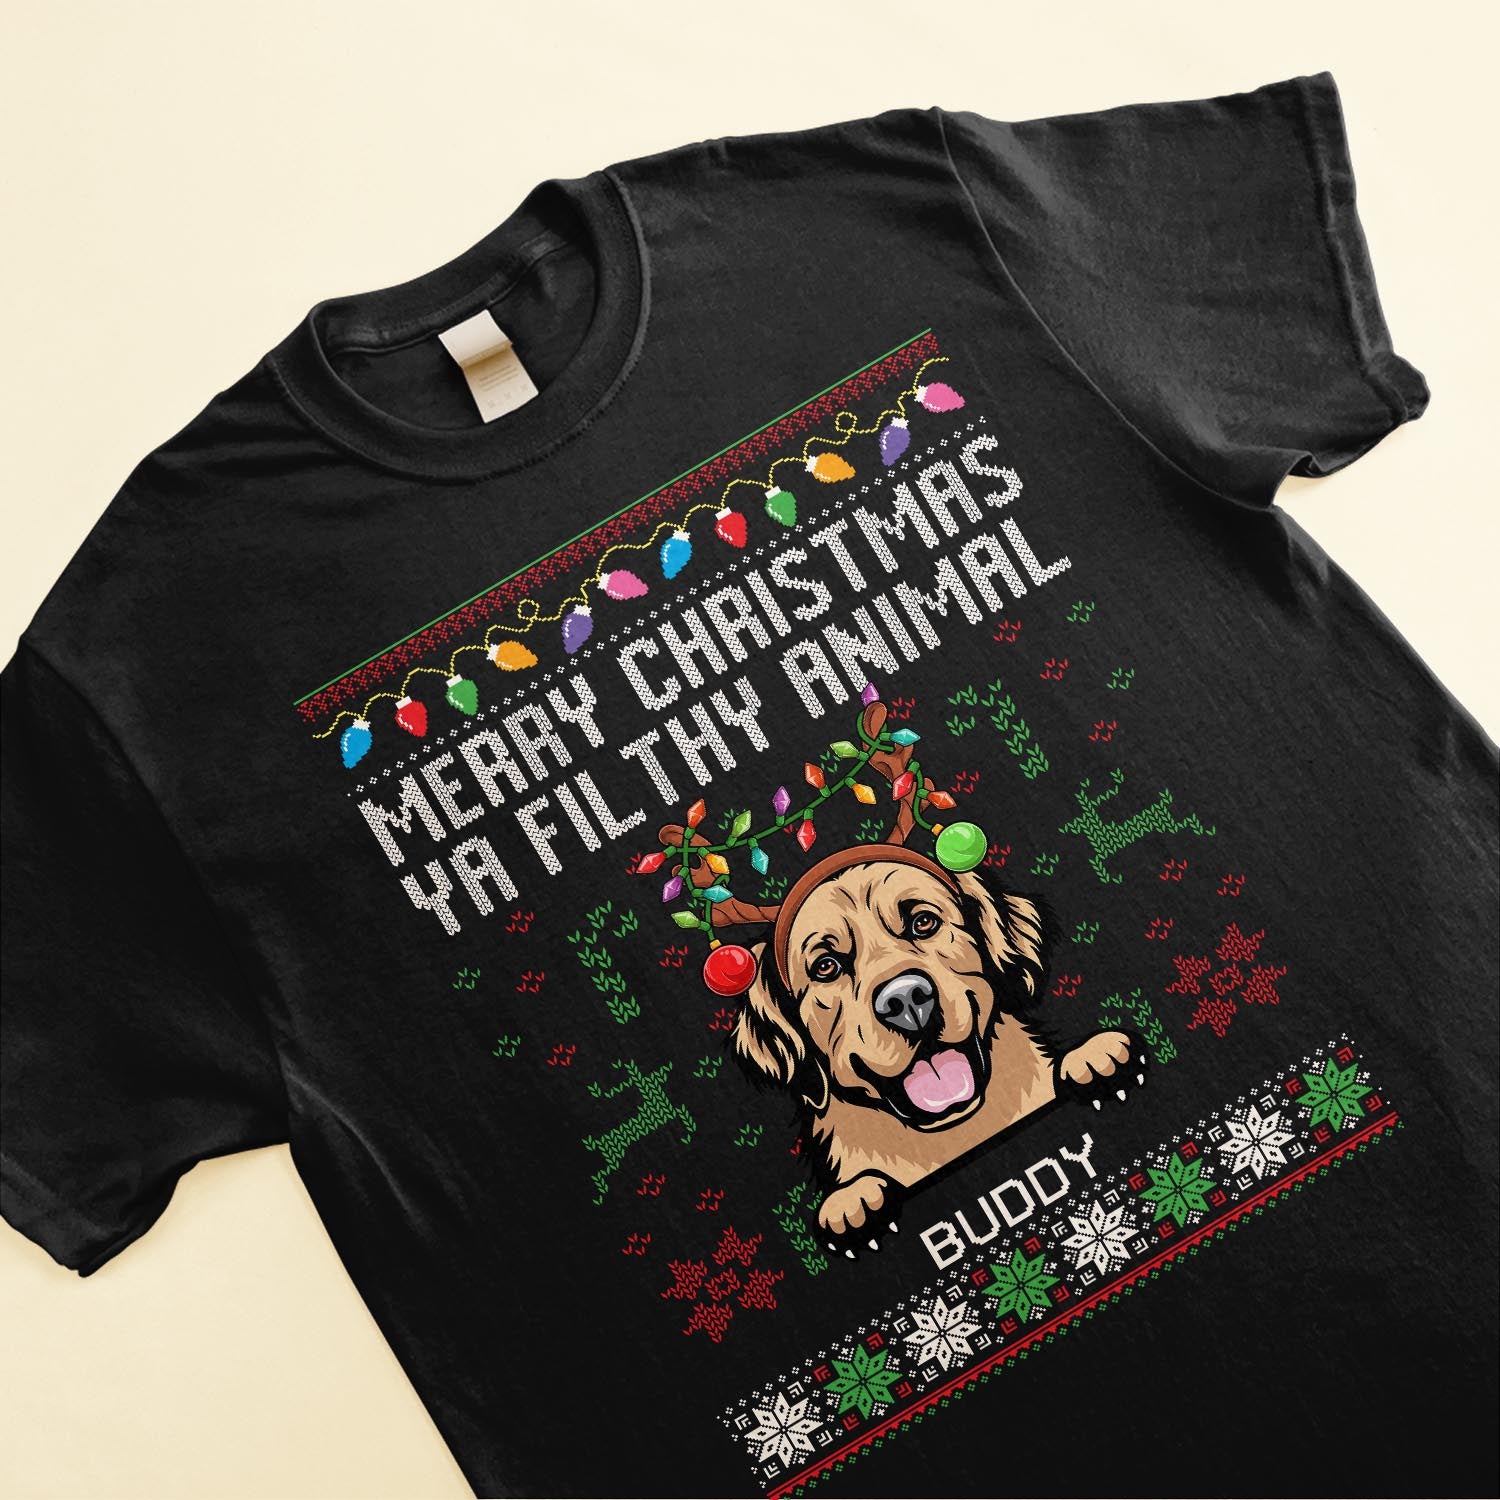 Merry Christmas Ya Filthy Animal - Personalized Shirt - Christmas, Birthday Gift For Pet Lover, Dog Lover, Cat Lover, Pet Owner, Dog Mom, Cat Mom, Dog Dad, Cat Dad